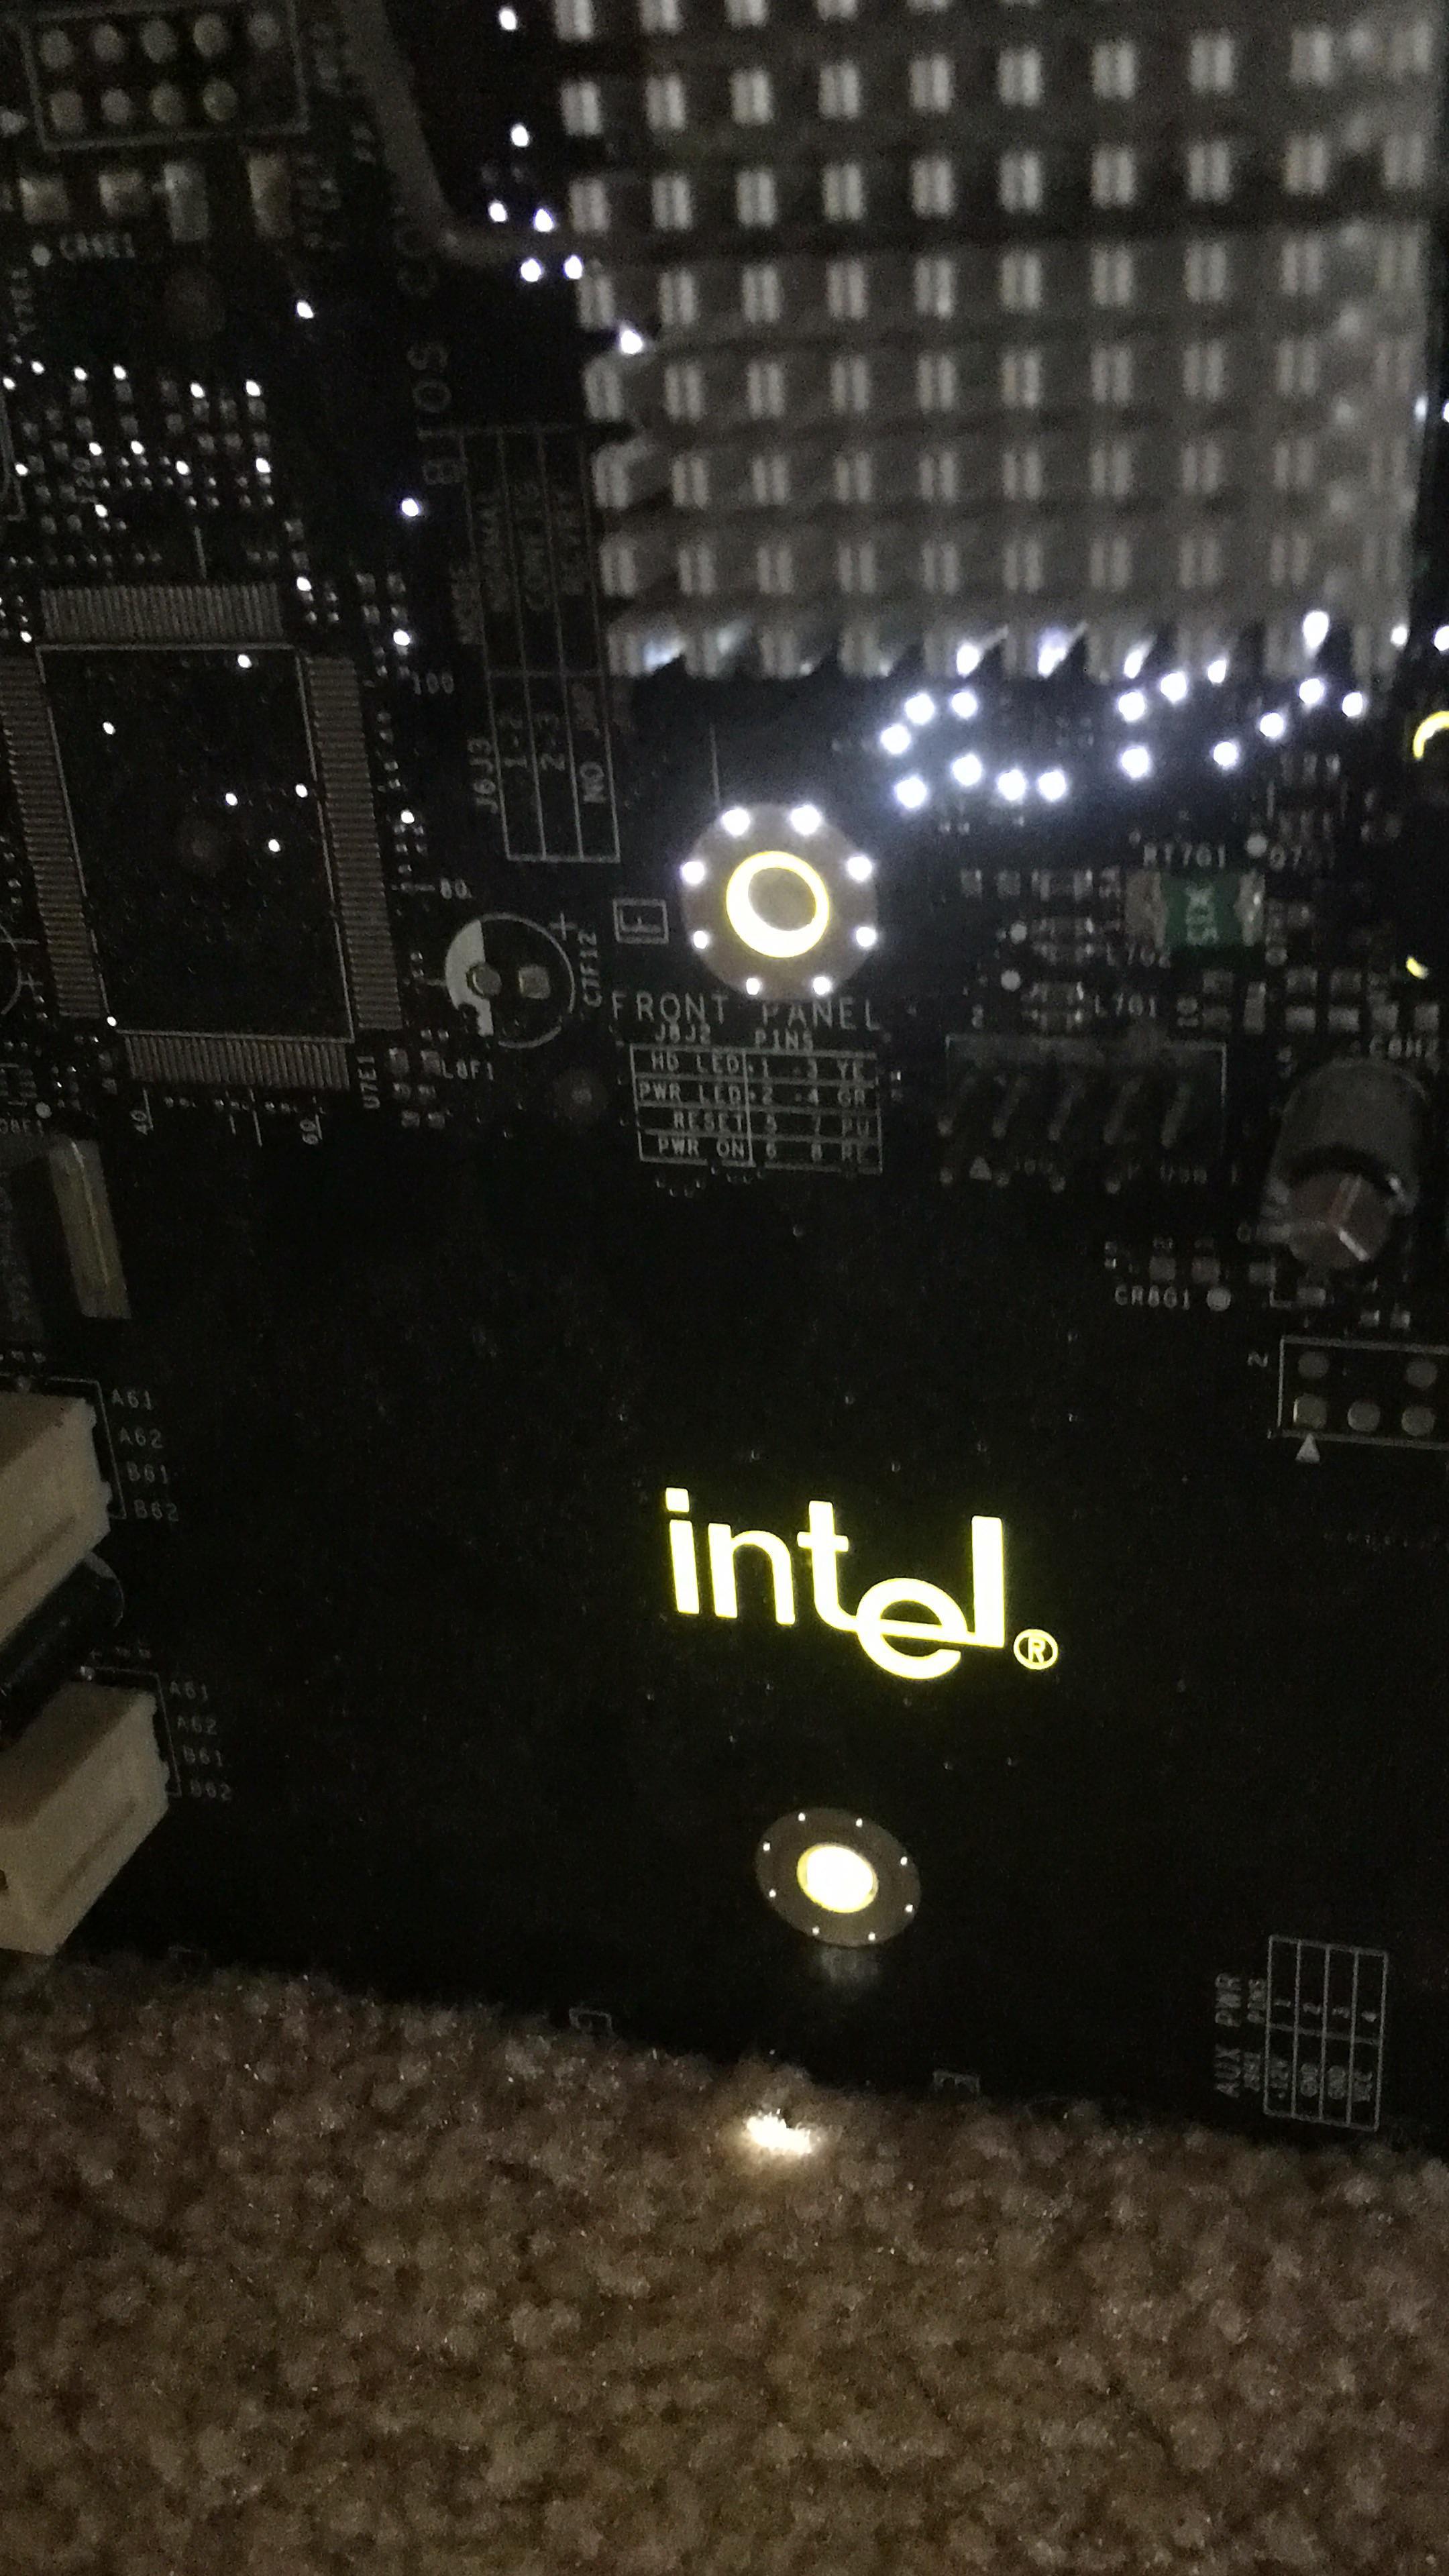 Building with Old Intel Logo - This old motherboard I found has a see through intel logo : pcmasterrace